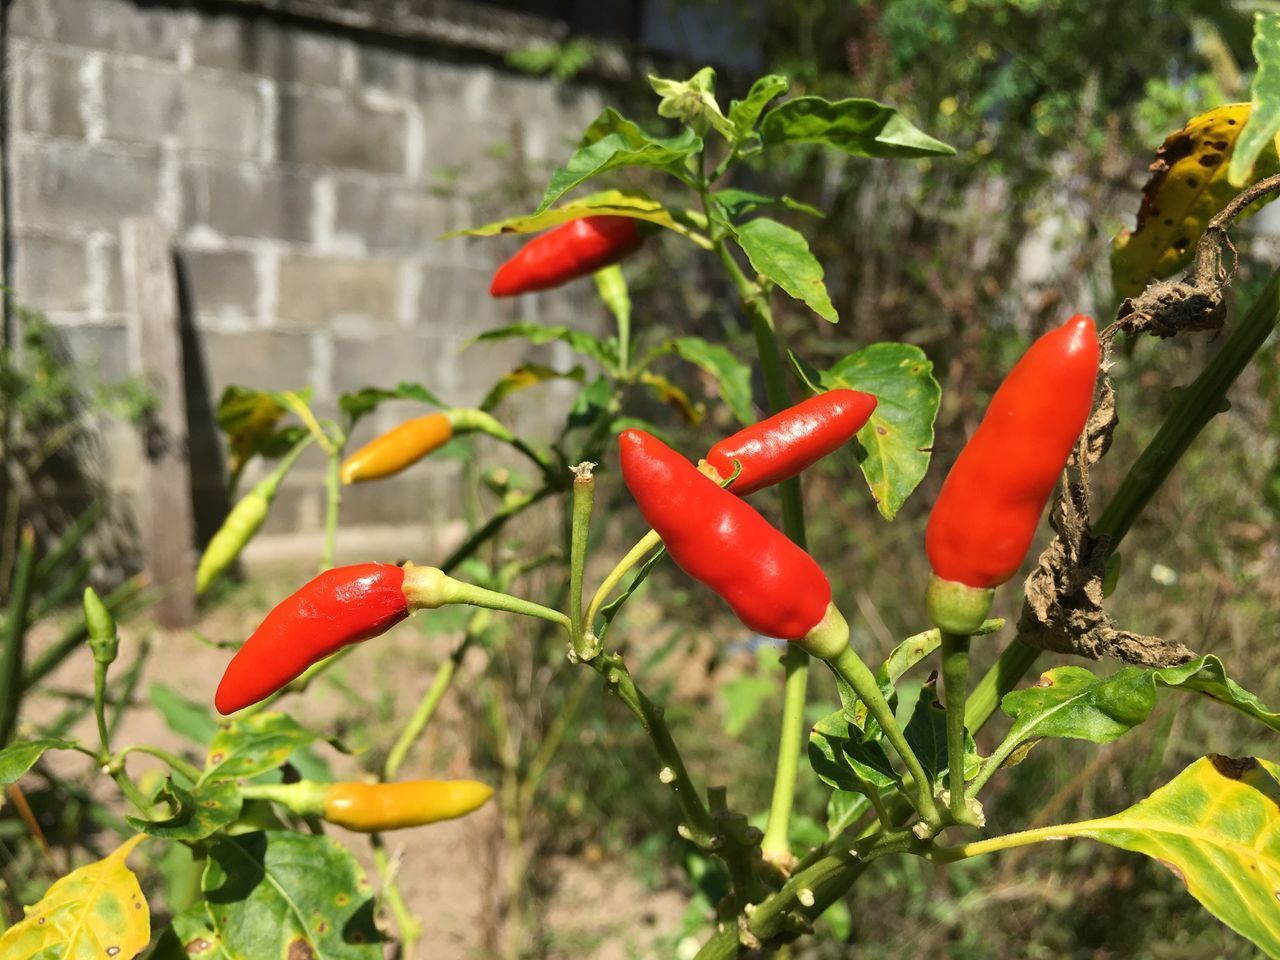 CLOSE-UP OF RED CHILI PEPPER PLANT